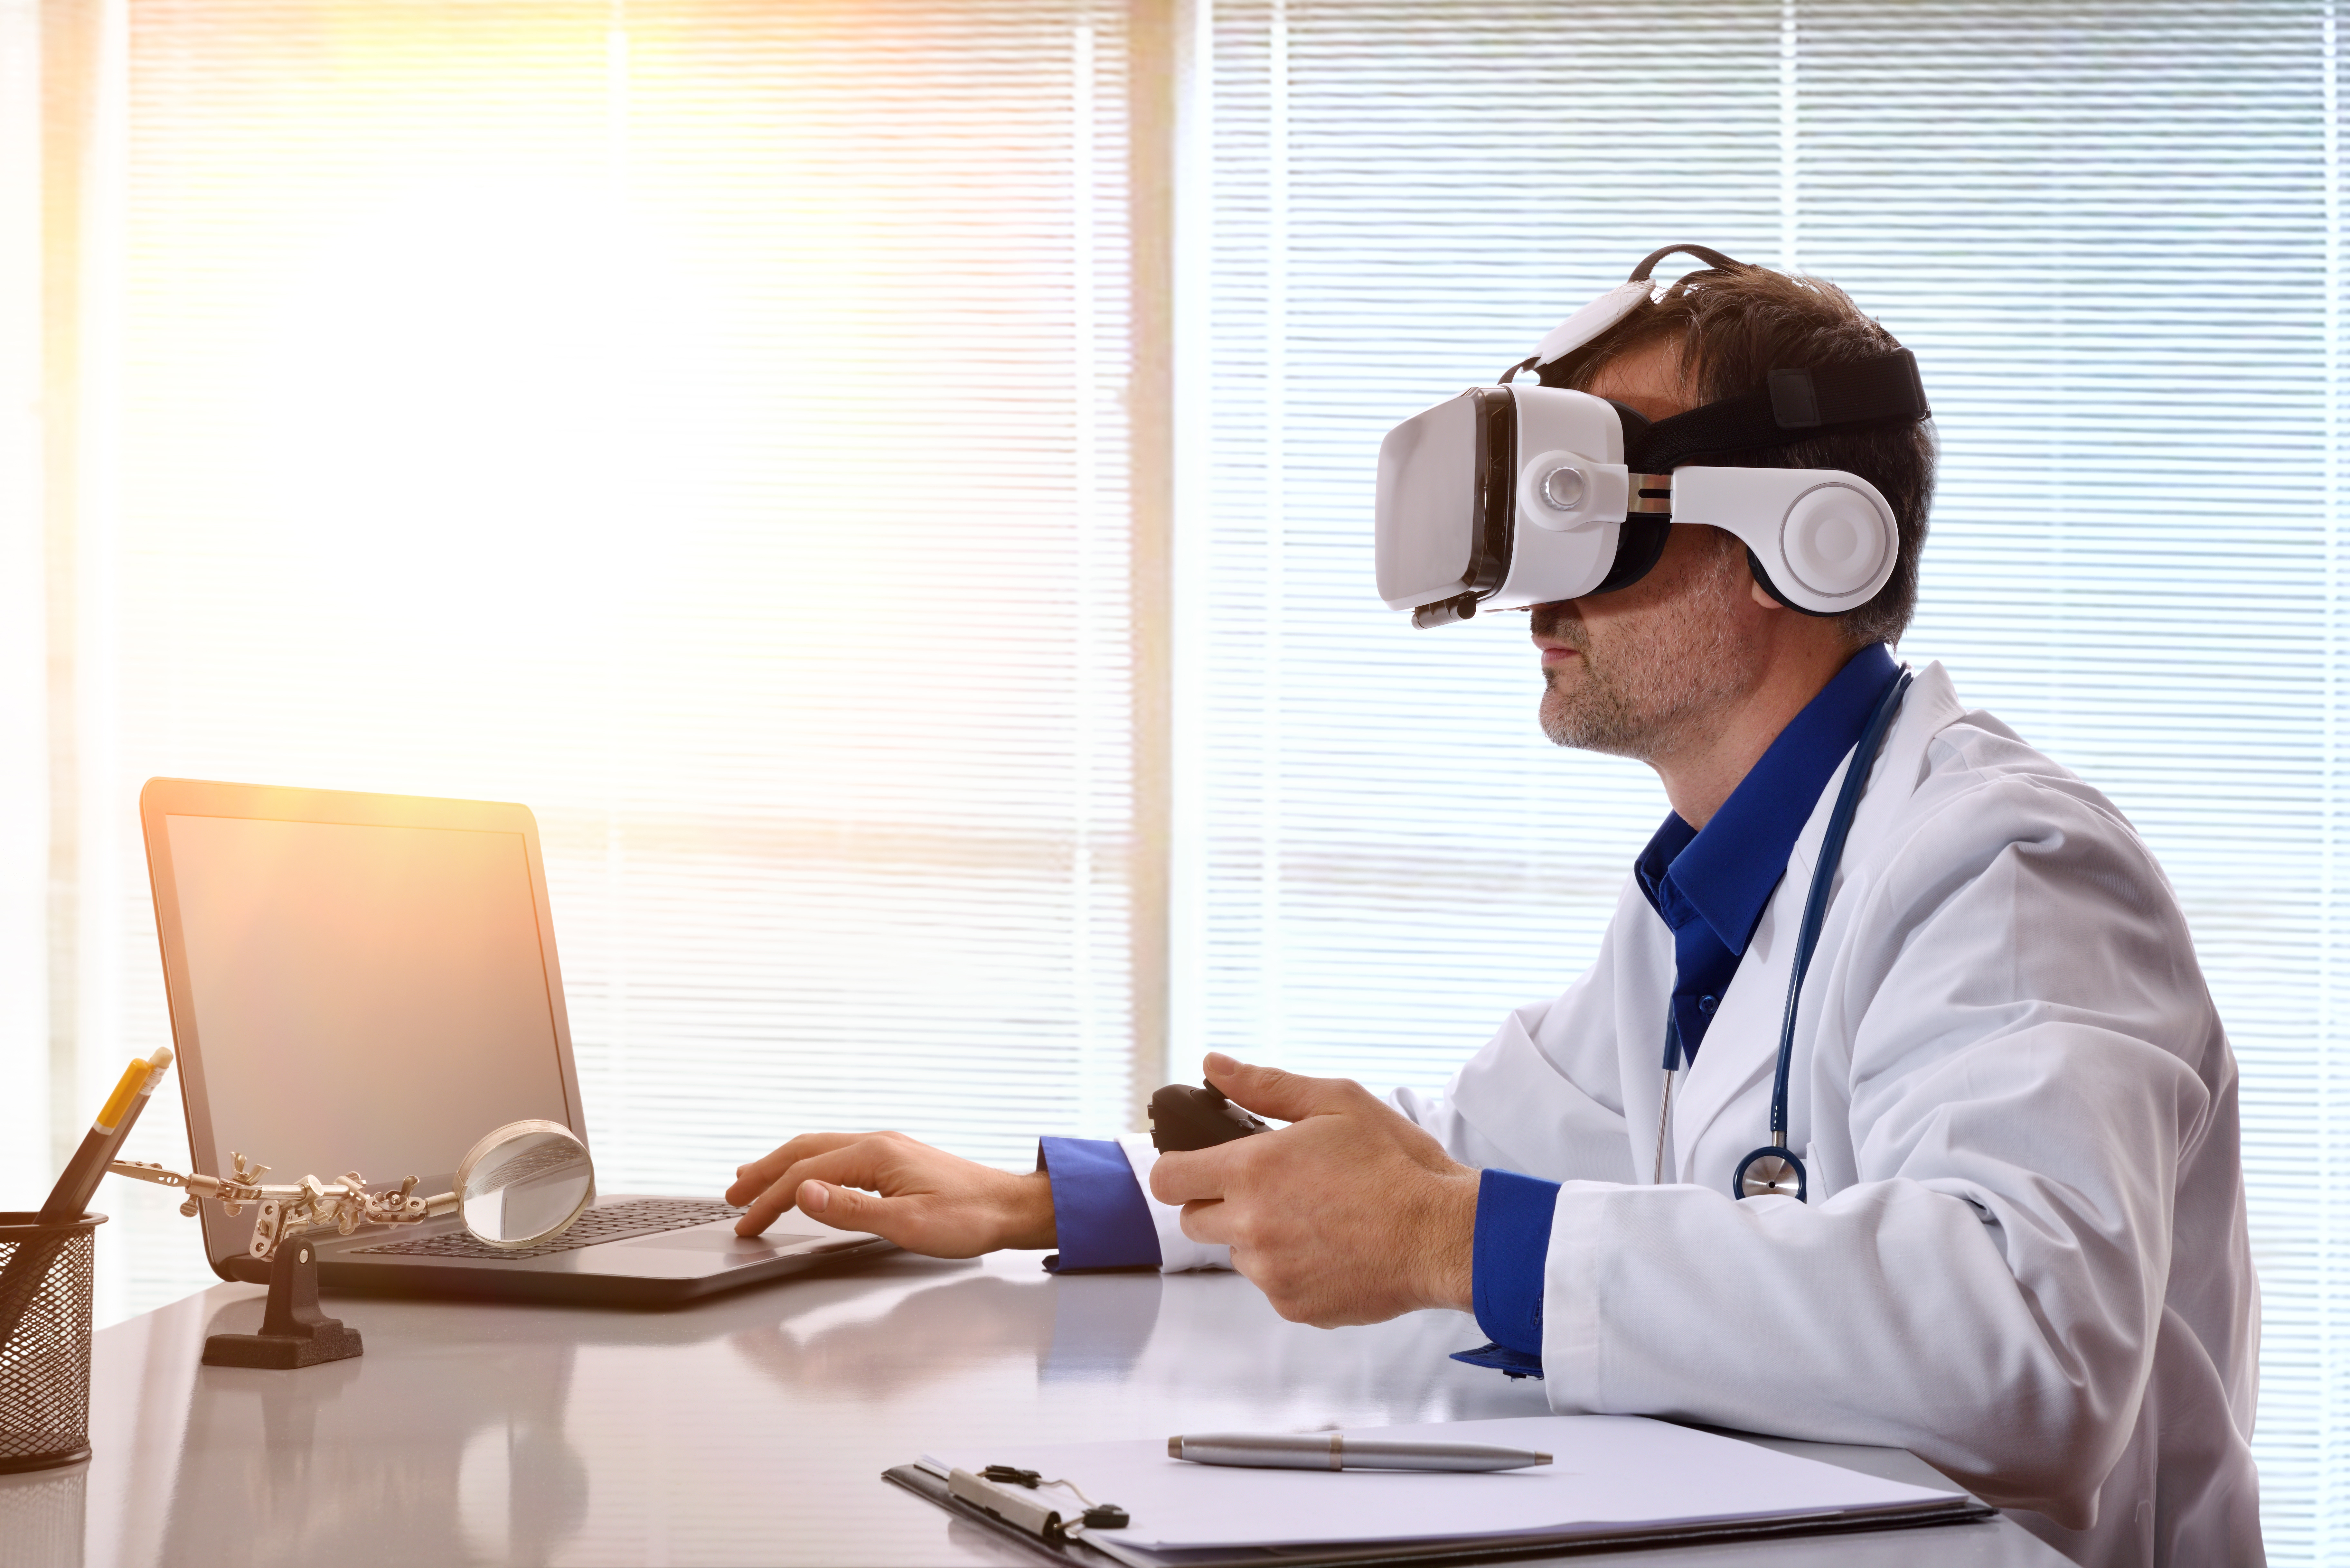 Virtual Reality as a Tool for Surgical and Anesthesia Training